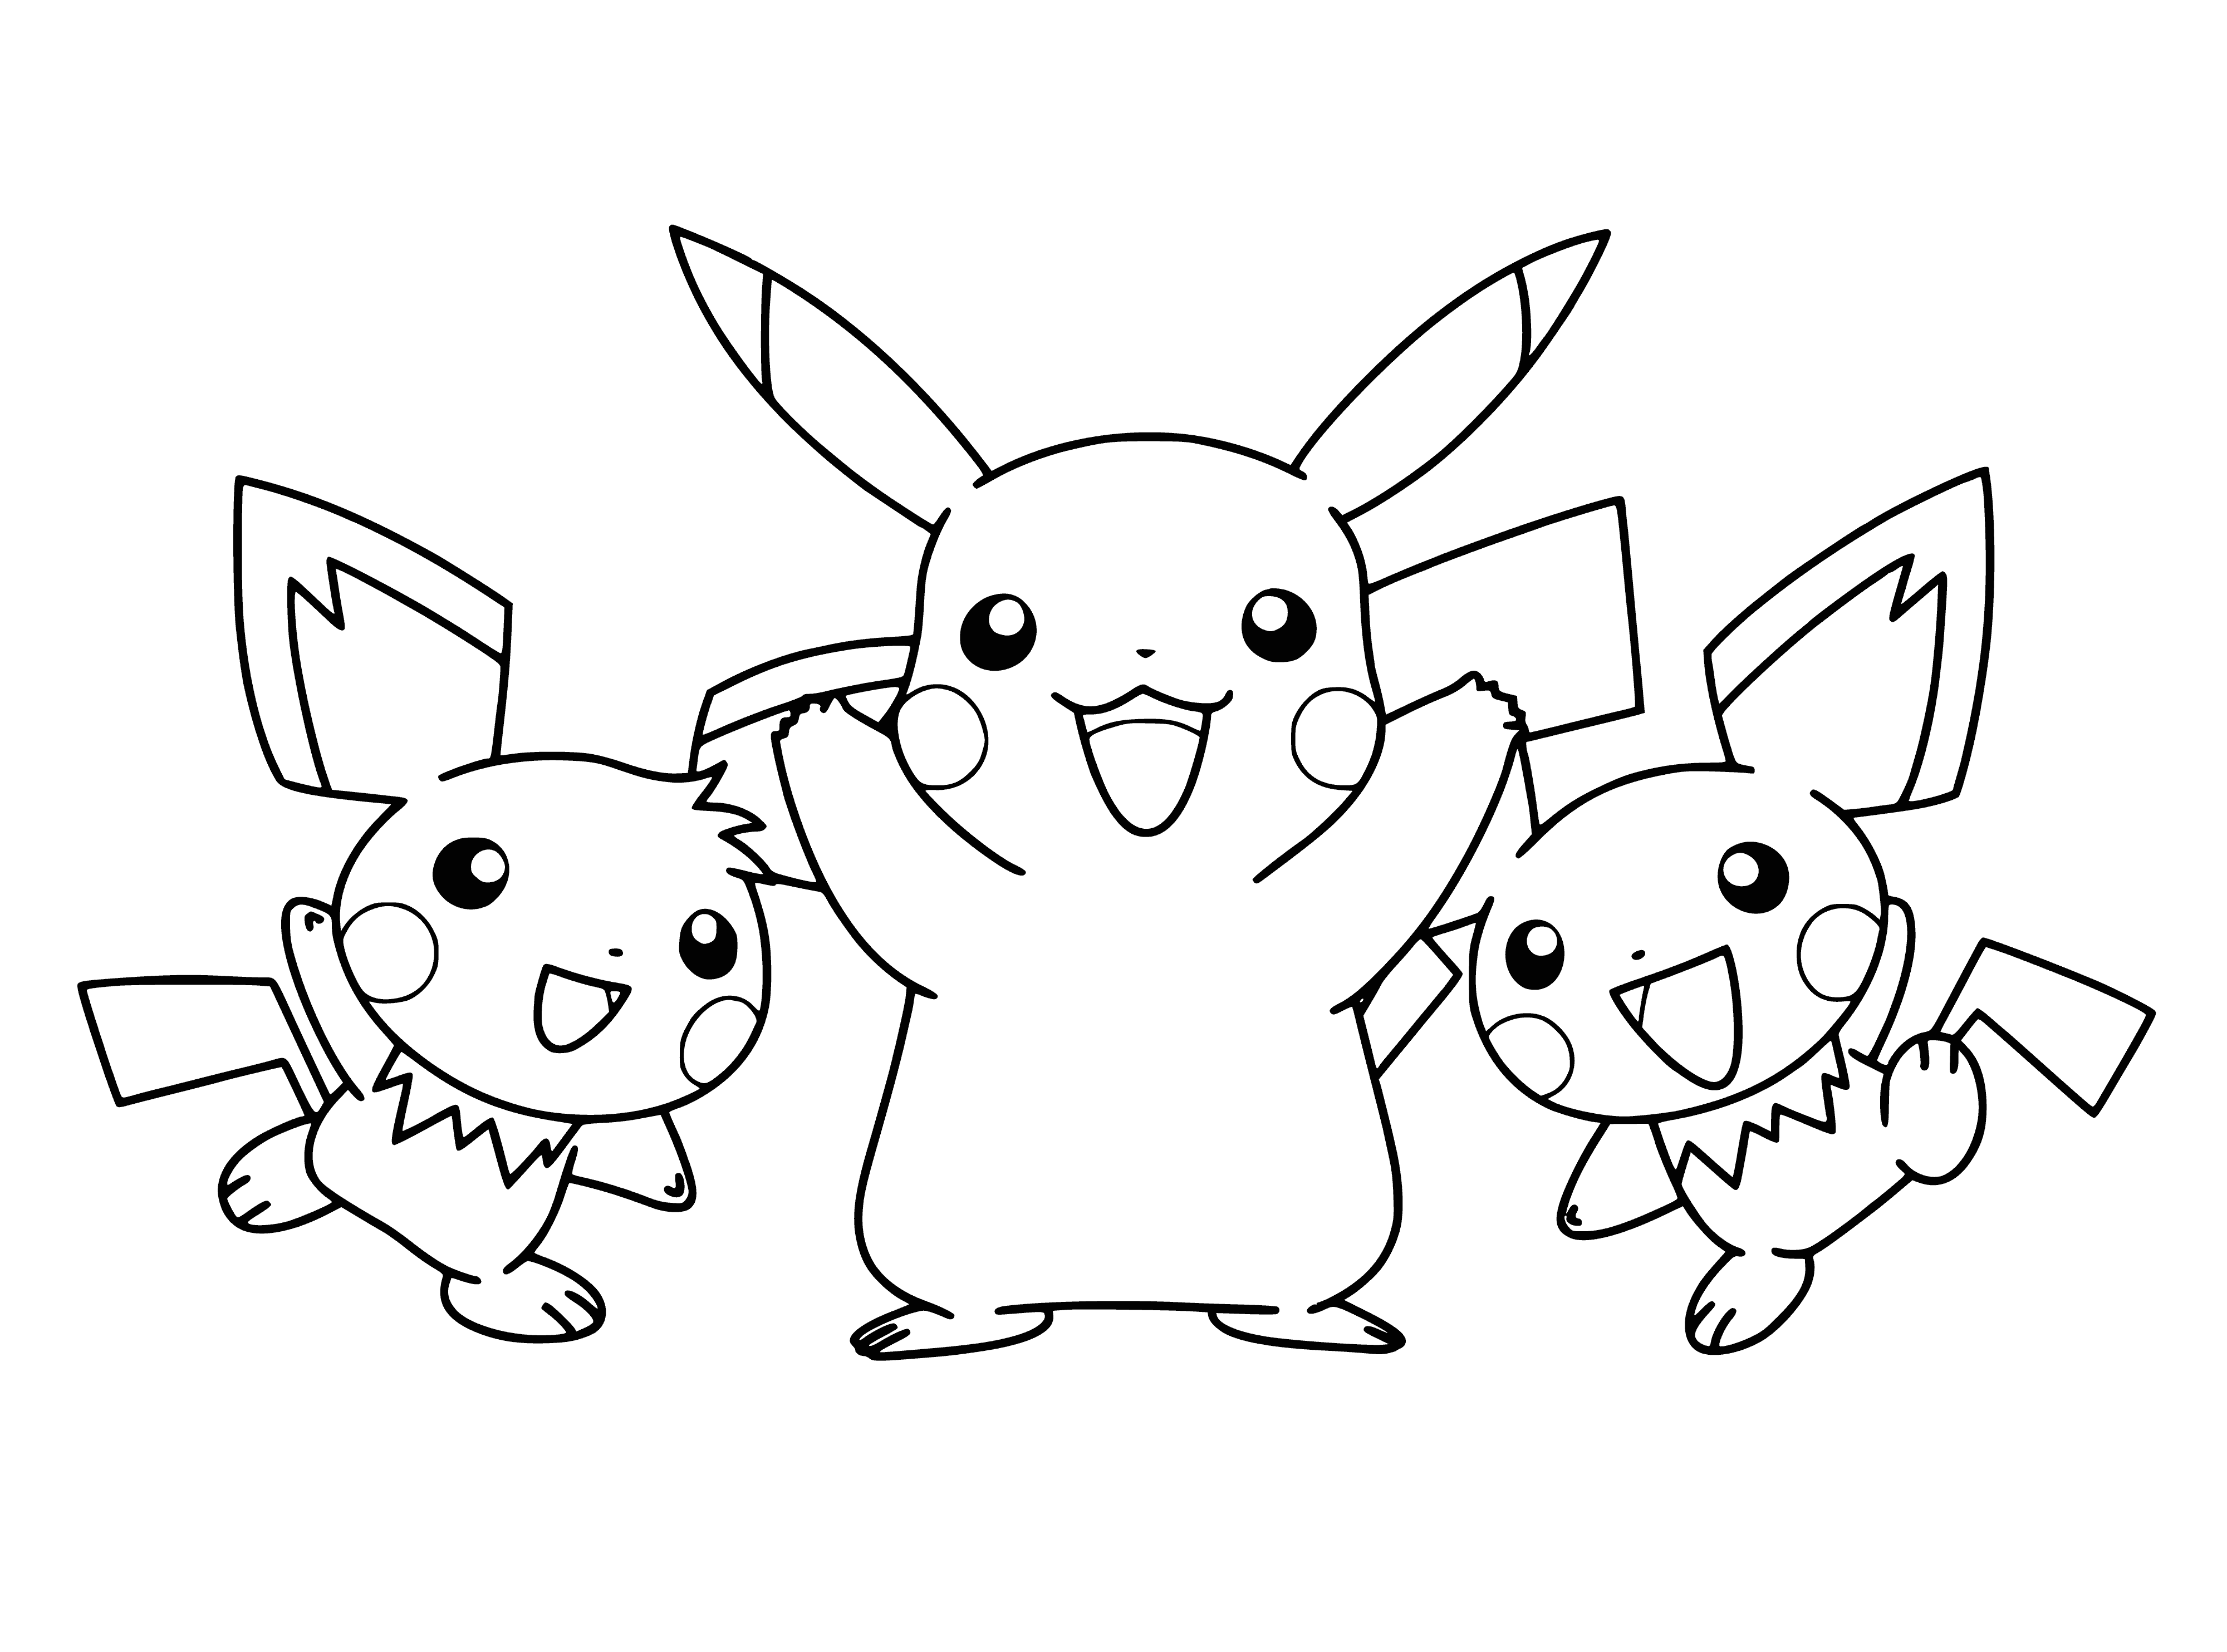 coloring page: Pikachu is a brown/yellow rodent Pokémon with lightning-shaped tail & red circles on cheeks. Usually stands on hind legs but can walk on all fours.